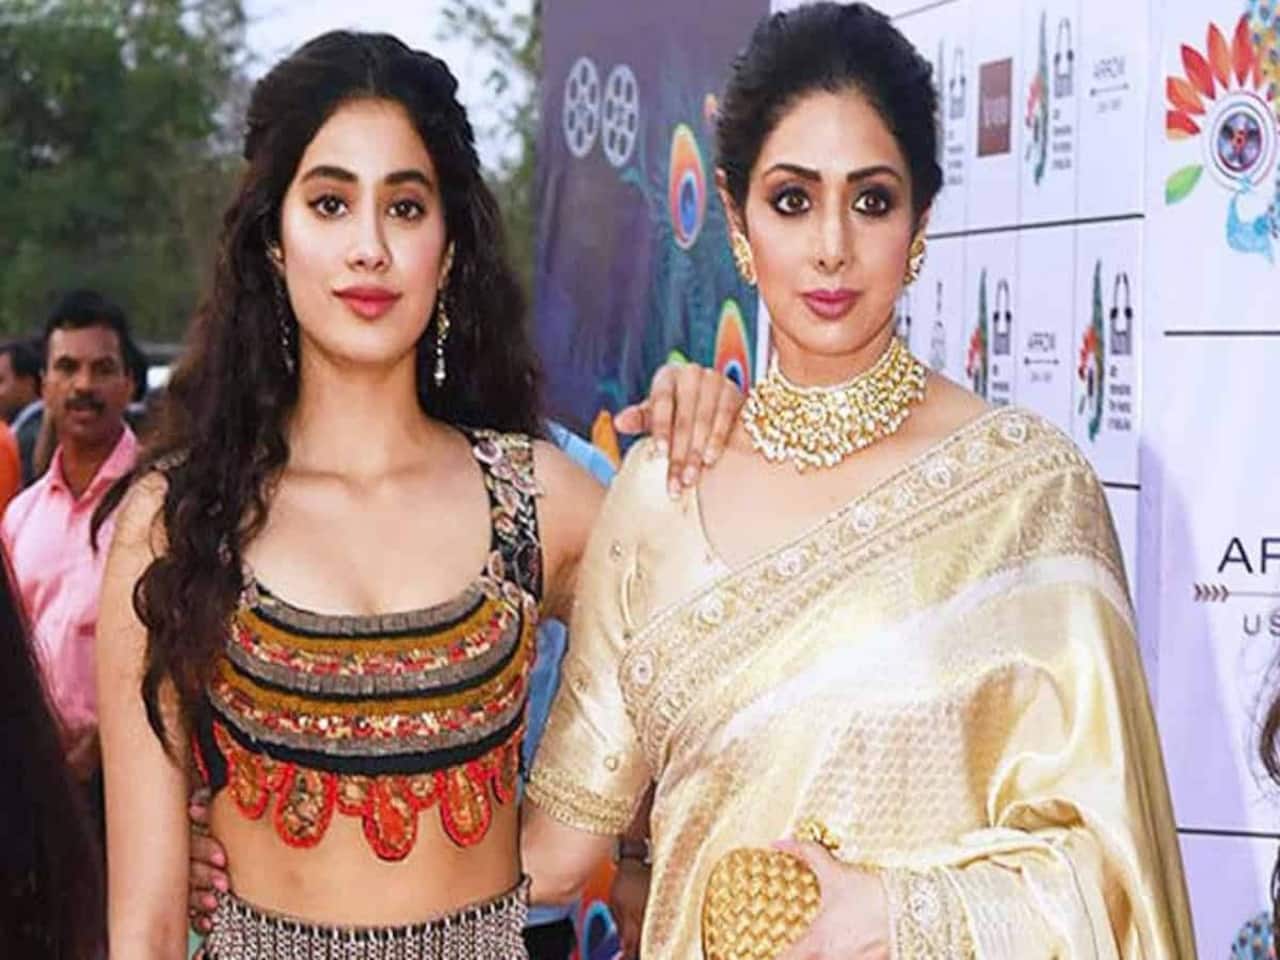 Janhvi Kapoor looks for late mother Sridevi everywhere; Mili actress pens an emotional note ahead of her death anniversary